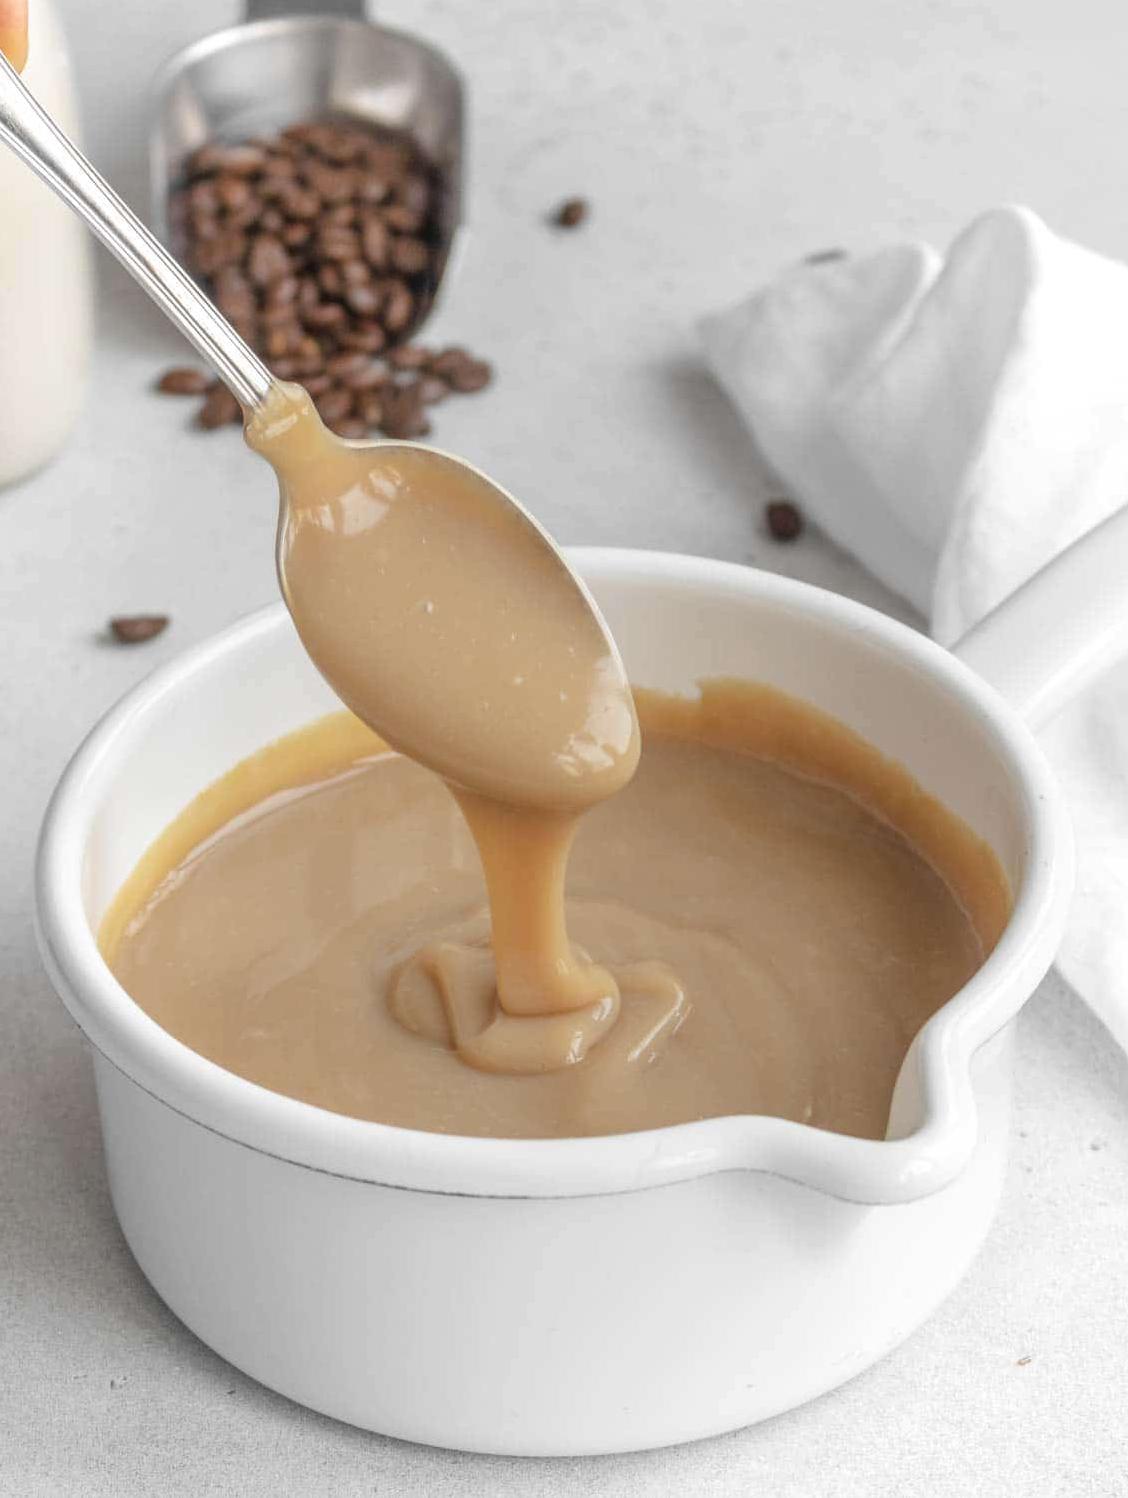  This creamy custard is infused with rich coffee flavor.